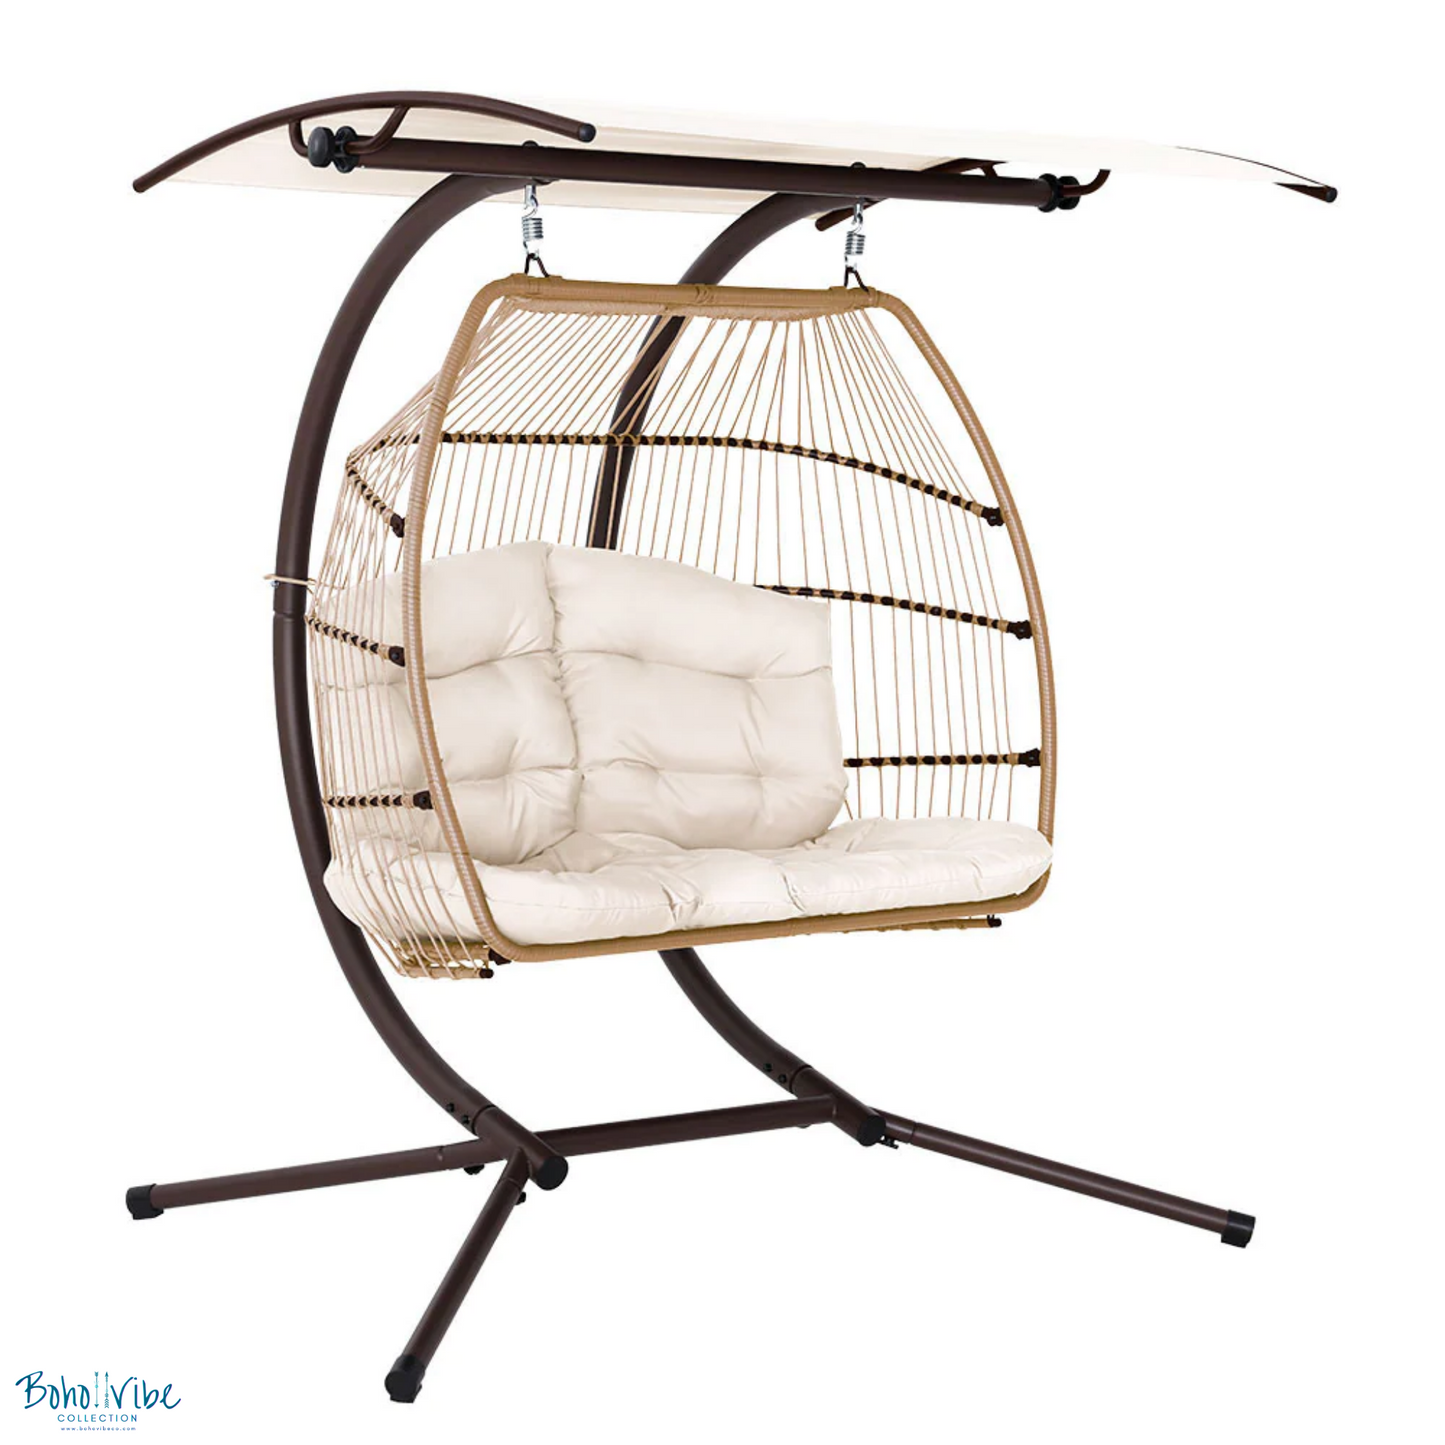 Boho ↡↟ Vibe Collection ↠ Wicker Double Hanging Pod Egg Swing Hammock Chair with Stand 